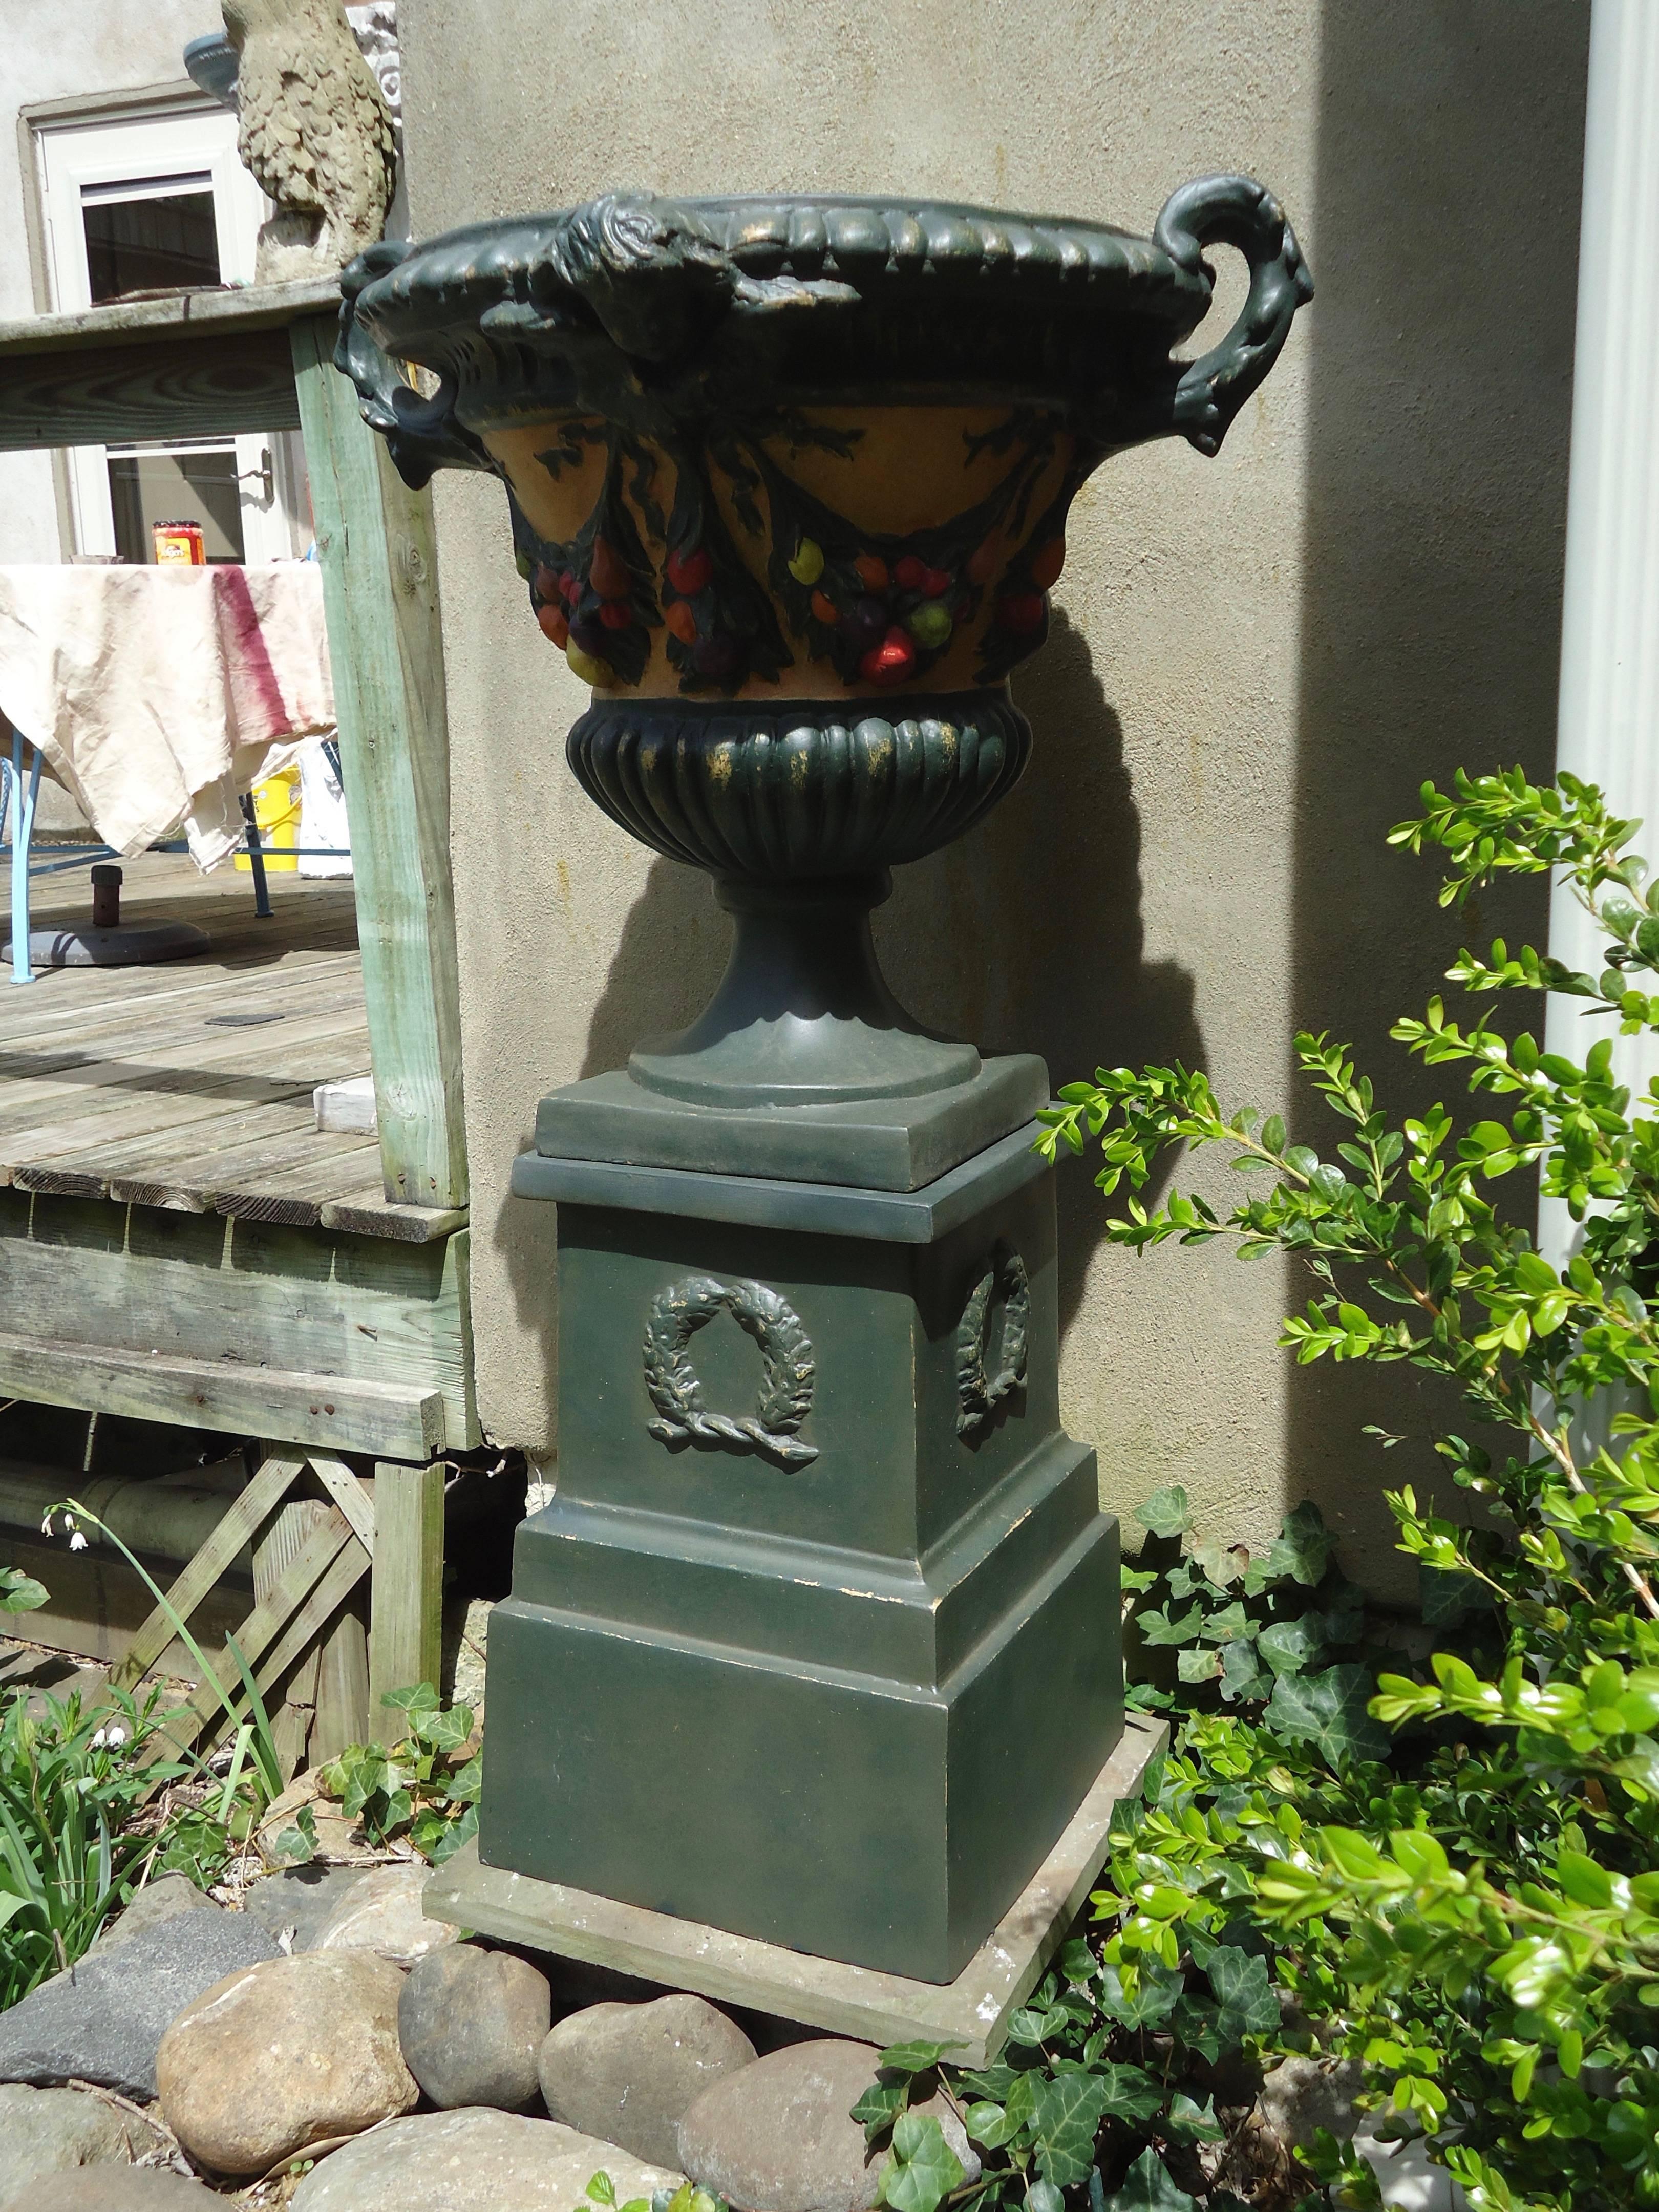 This fiberglass resin Italian style urn is hand cast from the original antique urn, having intricate details and a hand-painted aged faux finish. This high quality medium is impervious to weather, durable and maintenance free. It’s also very light